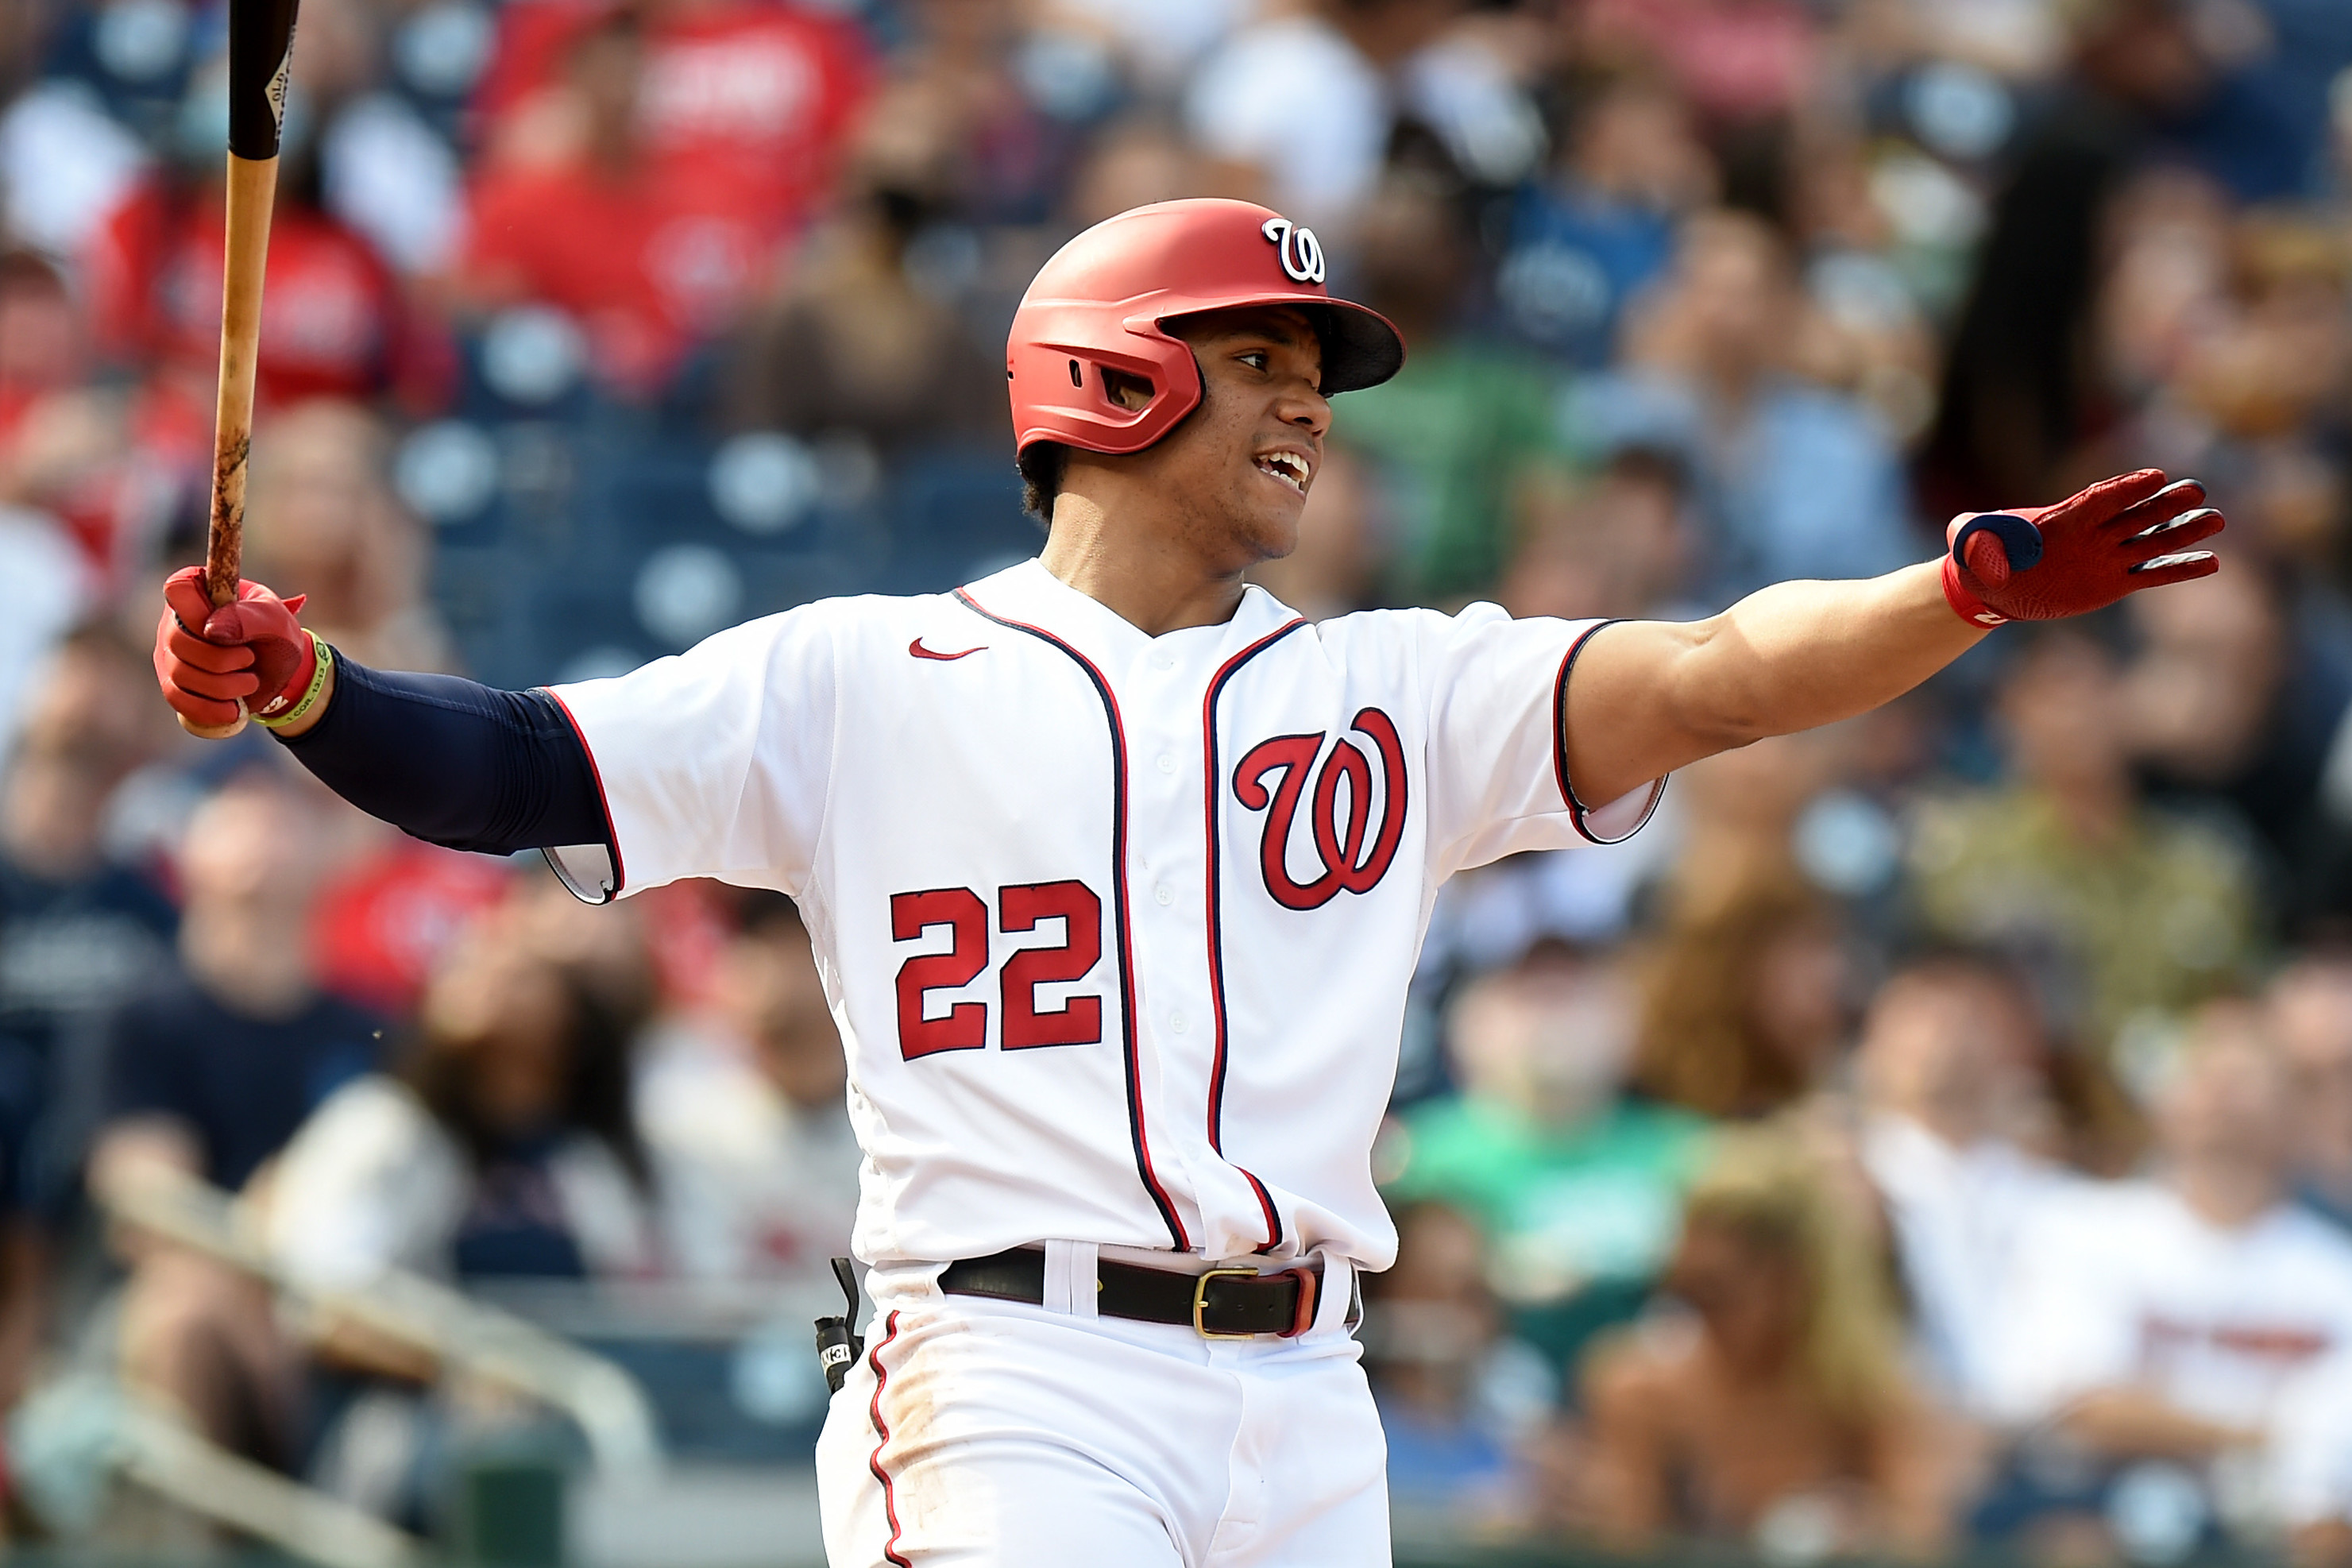 CJ Abrams gave the Nationals something to look forward to - The